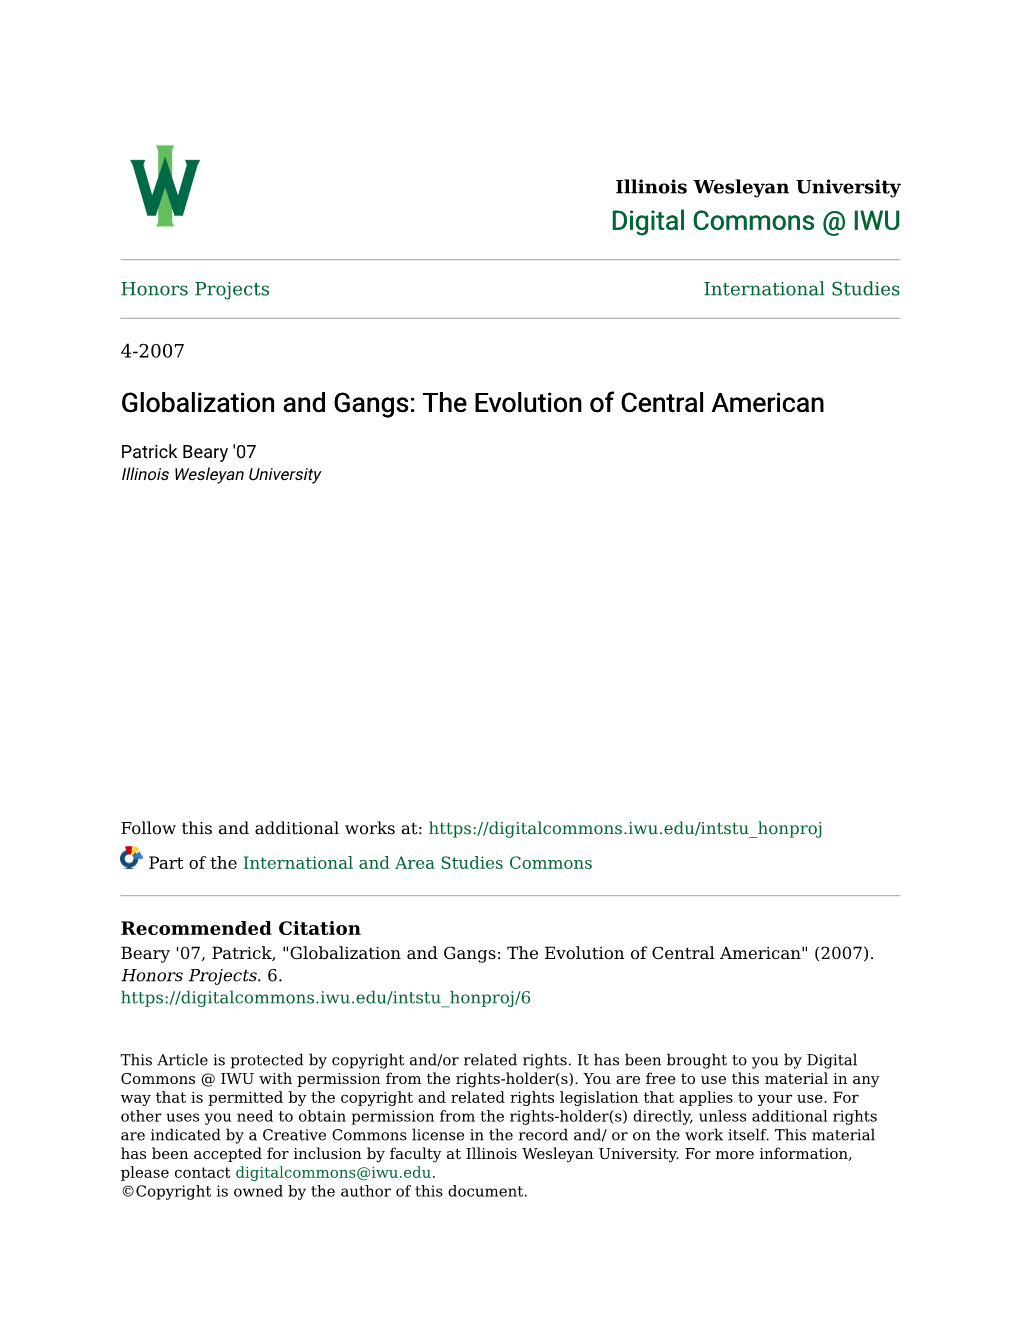 Globalization and Gangs: the Evolution of Central American